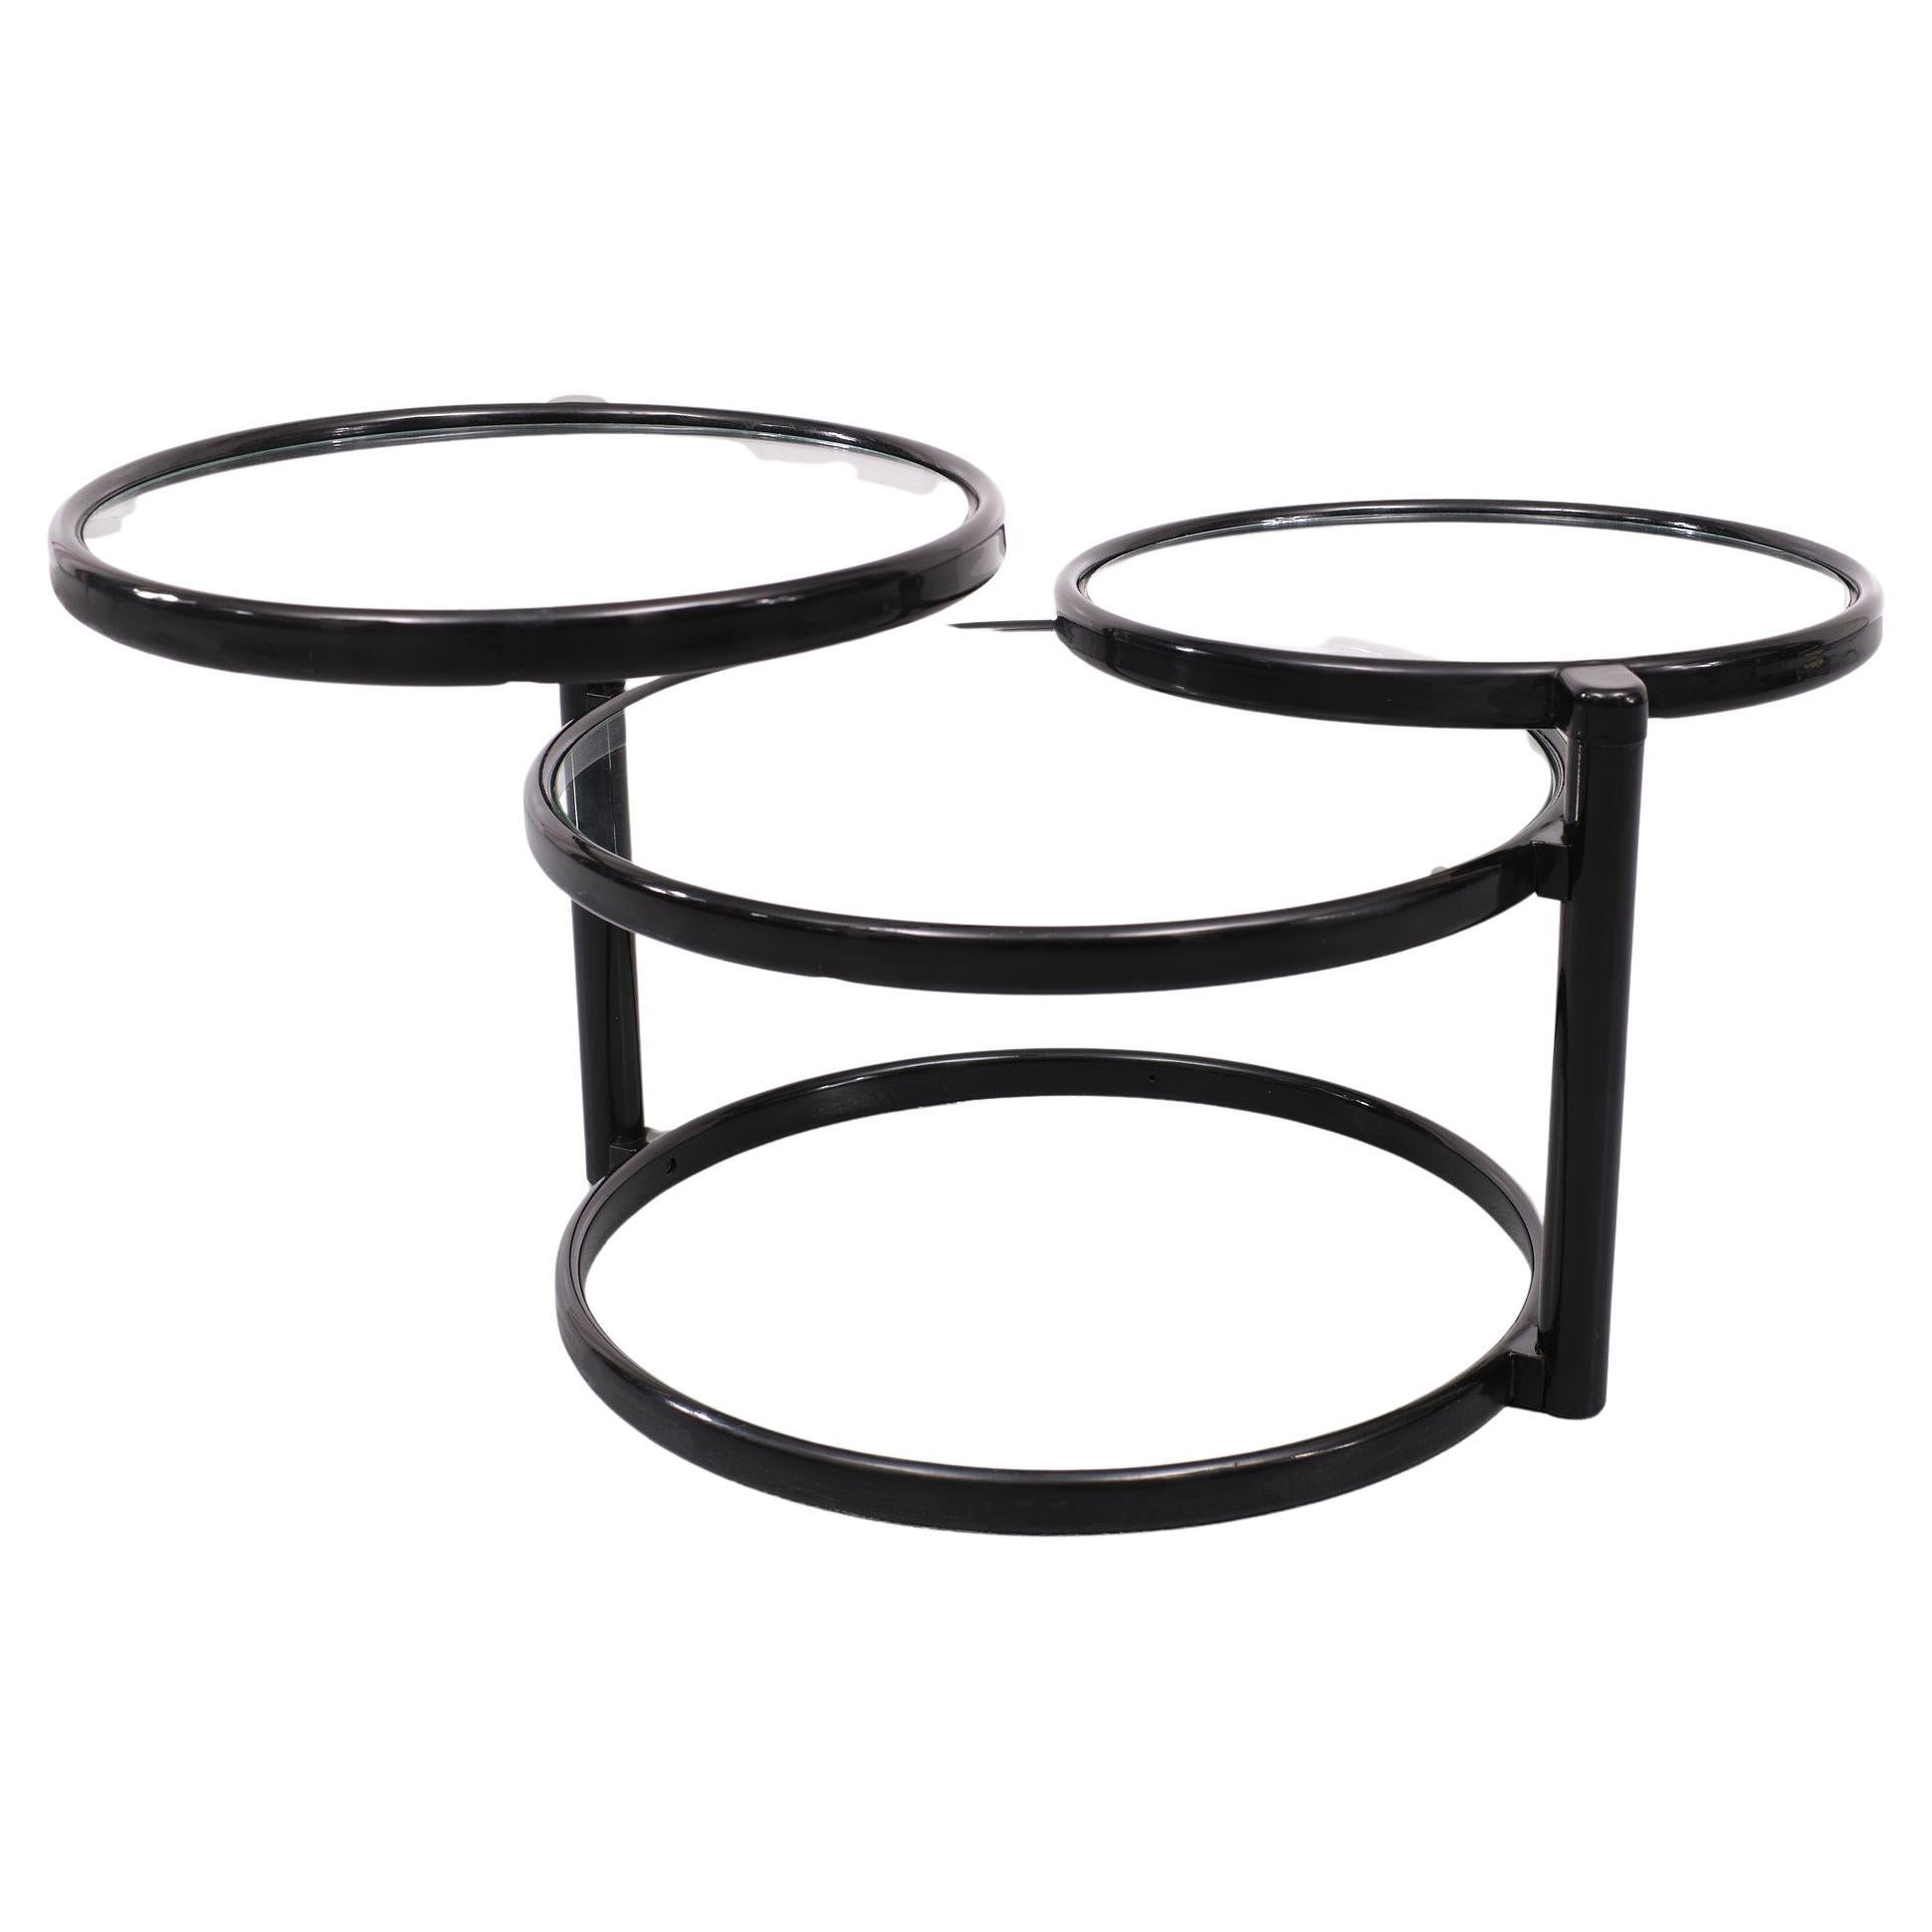 Very nice Three tier circle expandable coffee table. so easy in use. 
if you need more space just pullout a extra leaf. Black color base.